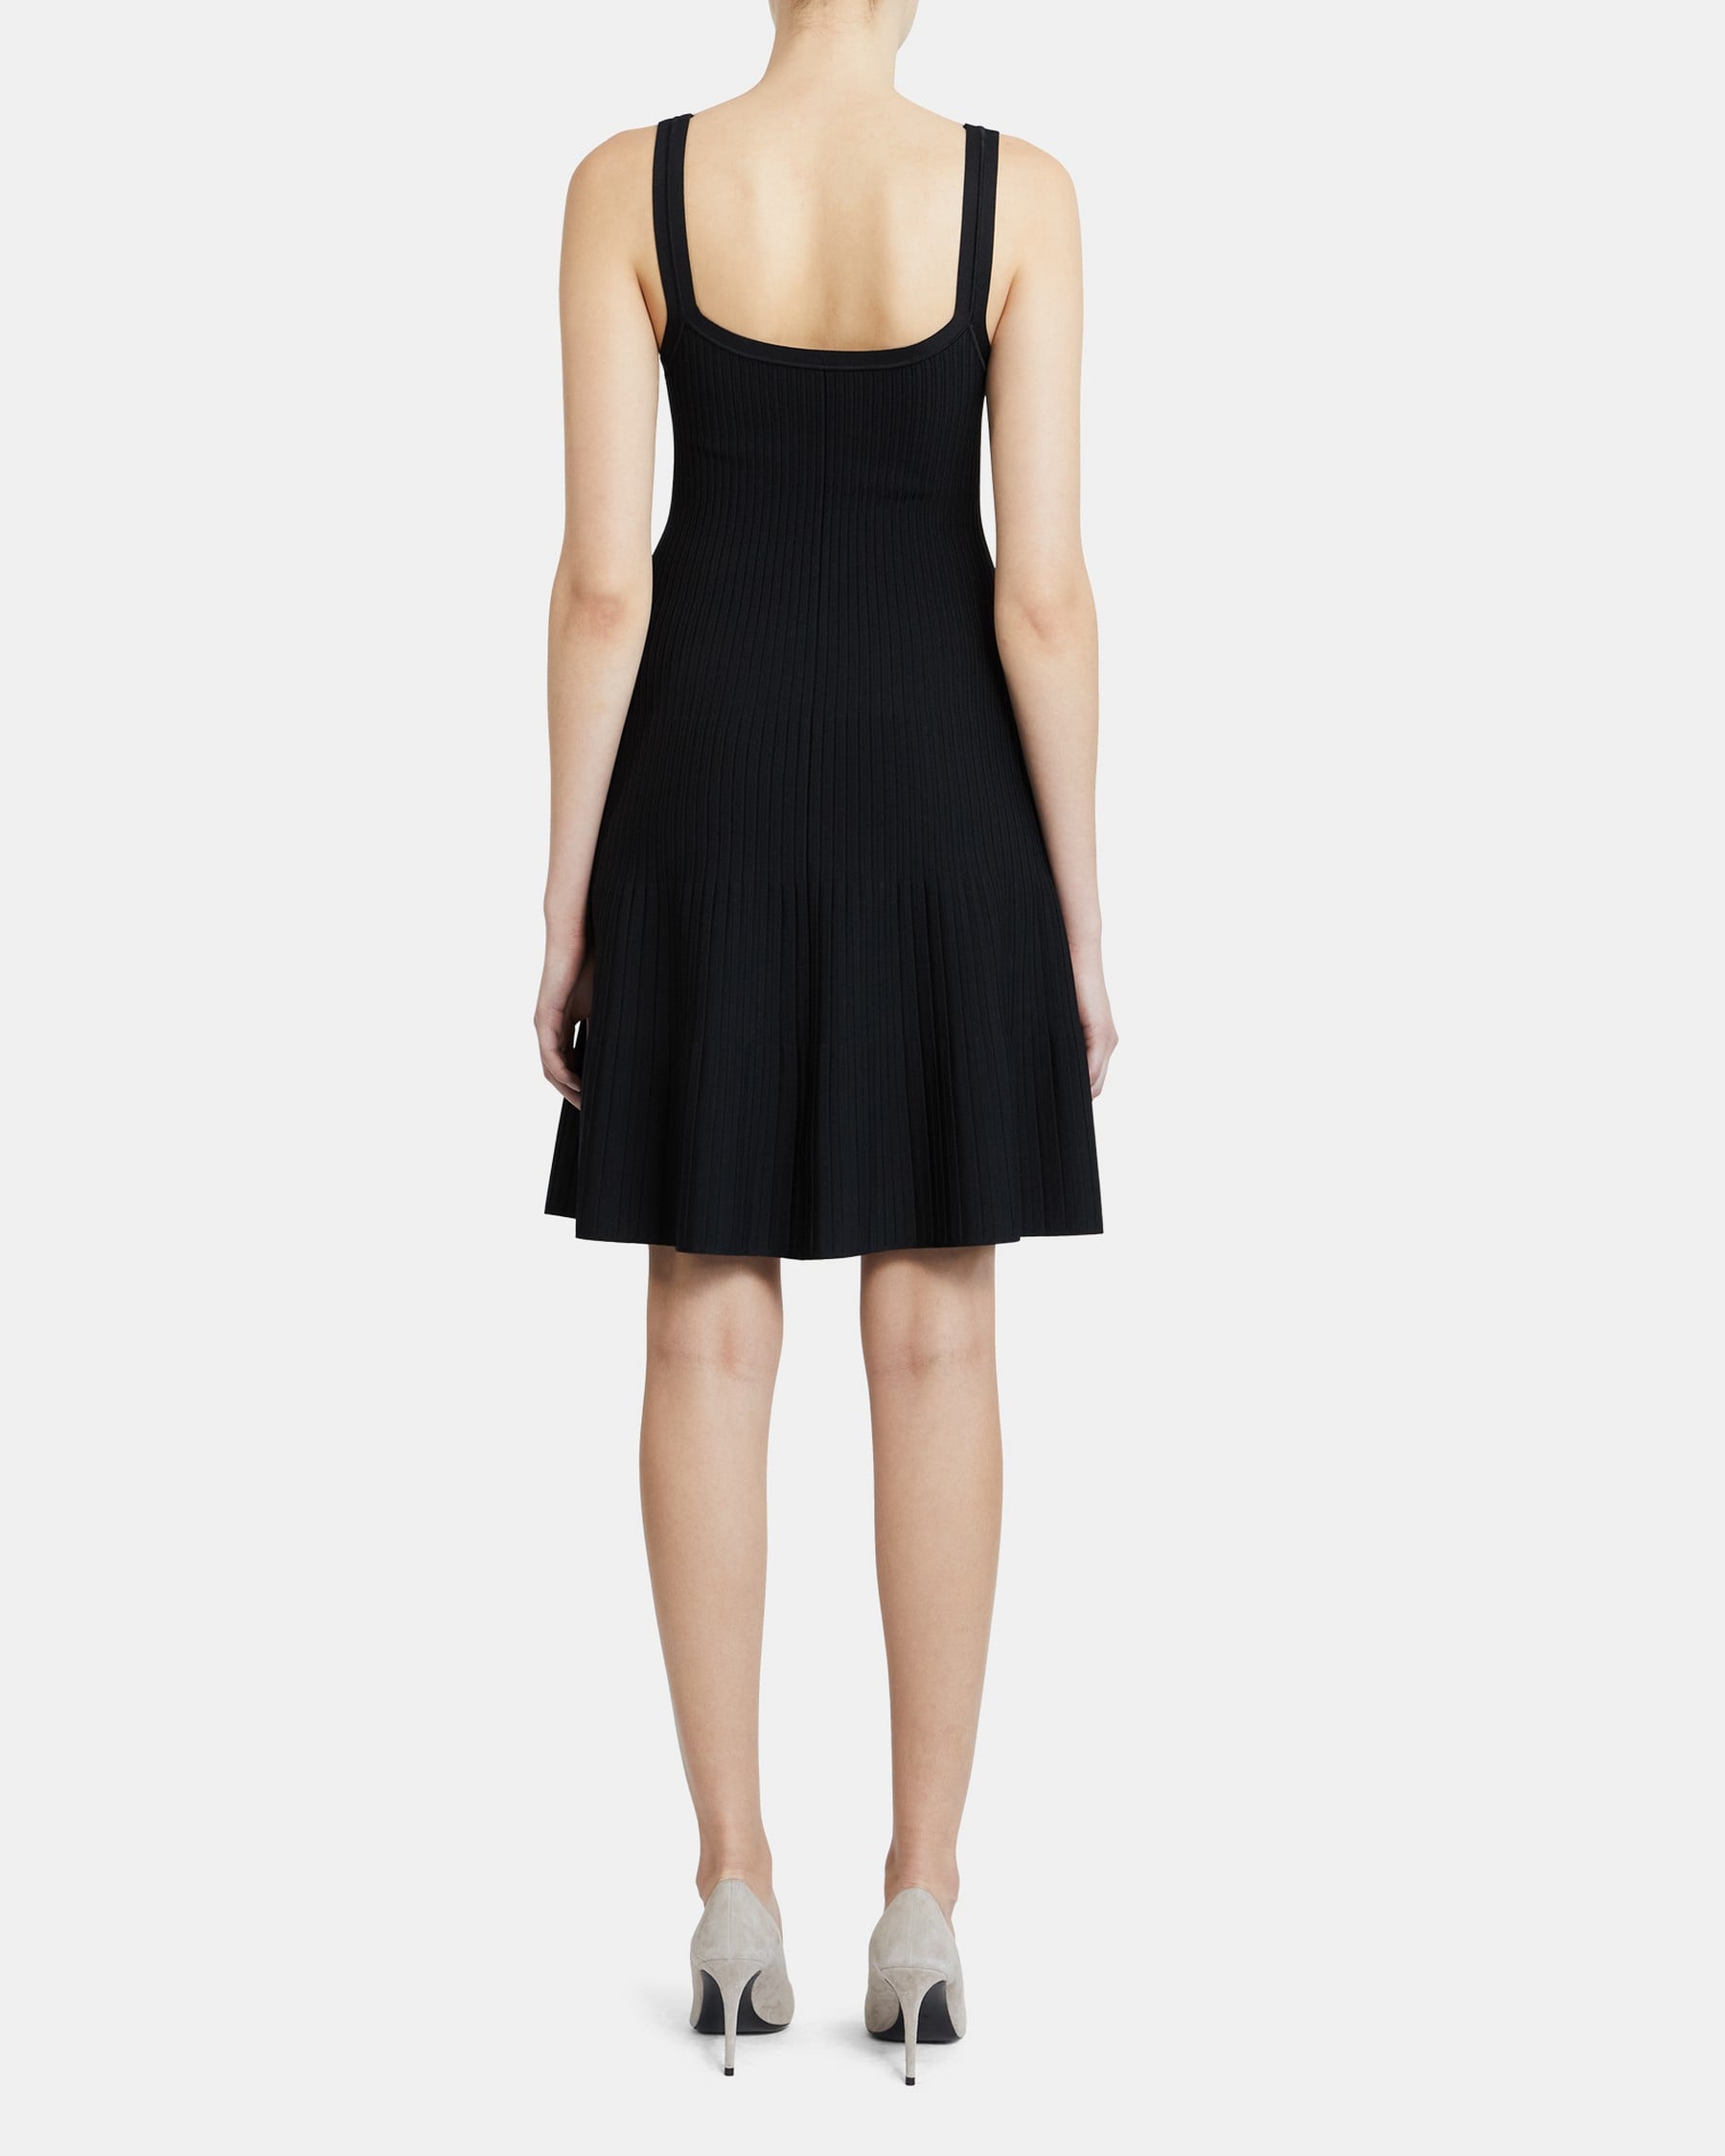 KNIT PLEAT DRESS | Theory Outlet